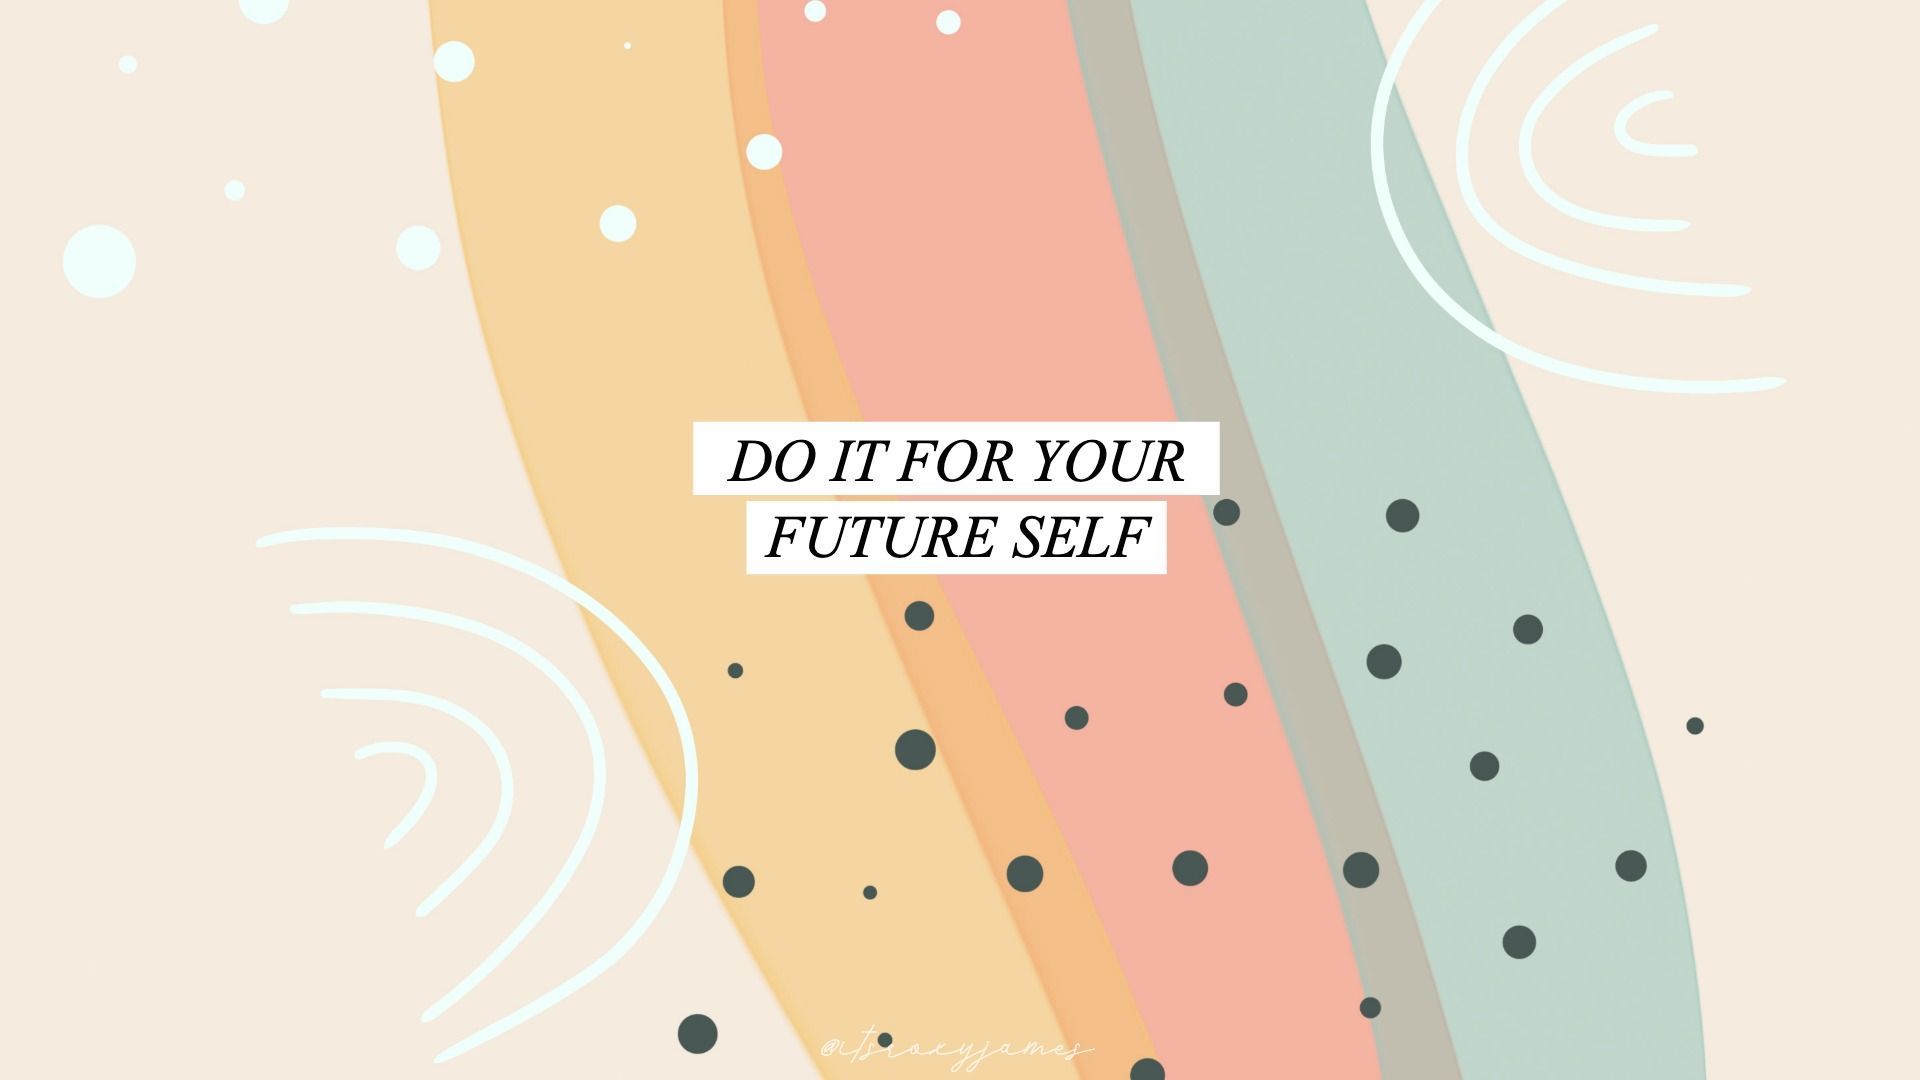 FREE Phone Wallpaper: Boho & Inspiring Quotes by Roxy James James. Inspirational quotes, Free phone wallpaper, Creativity quotes